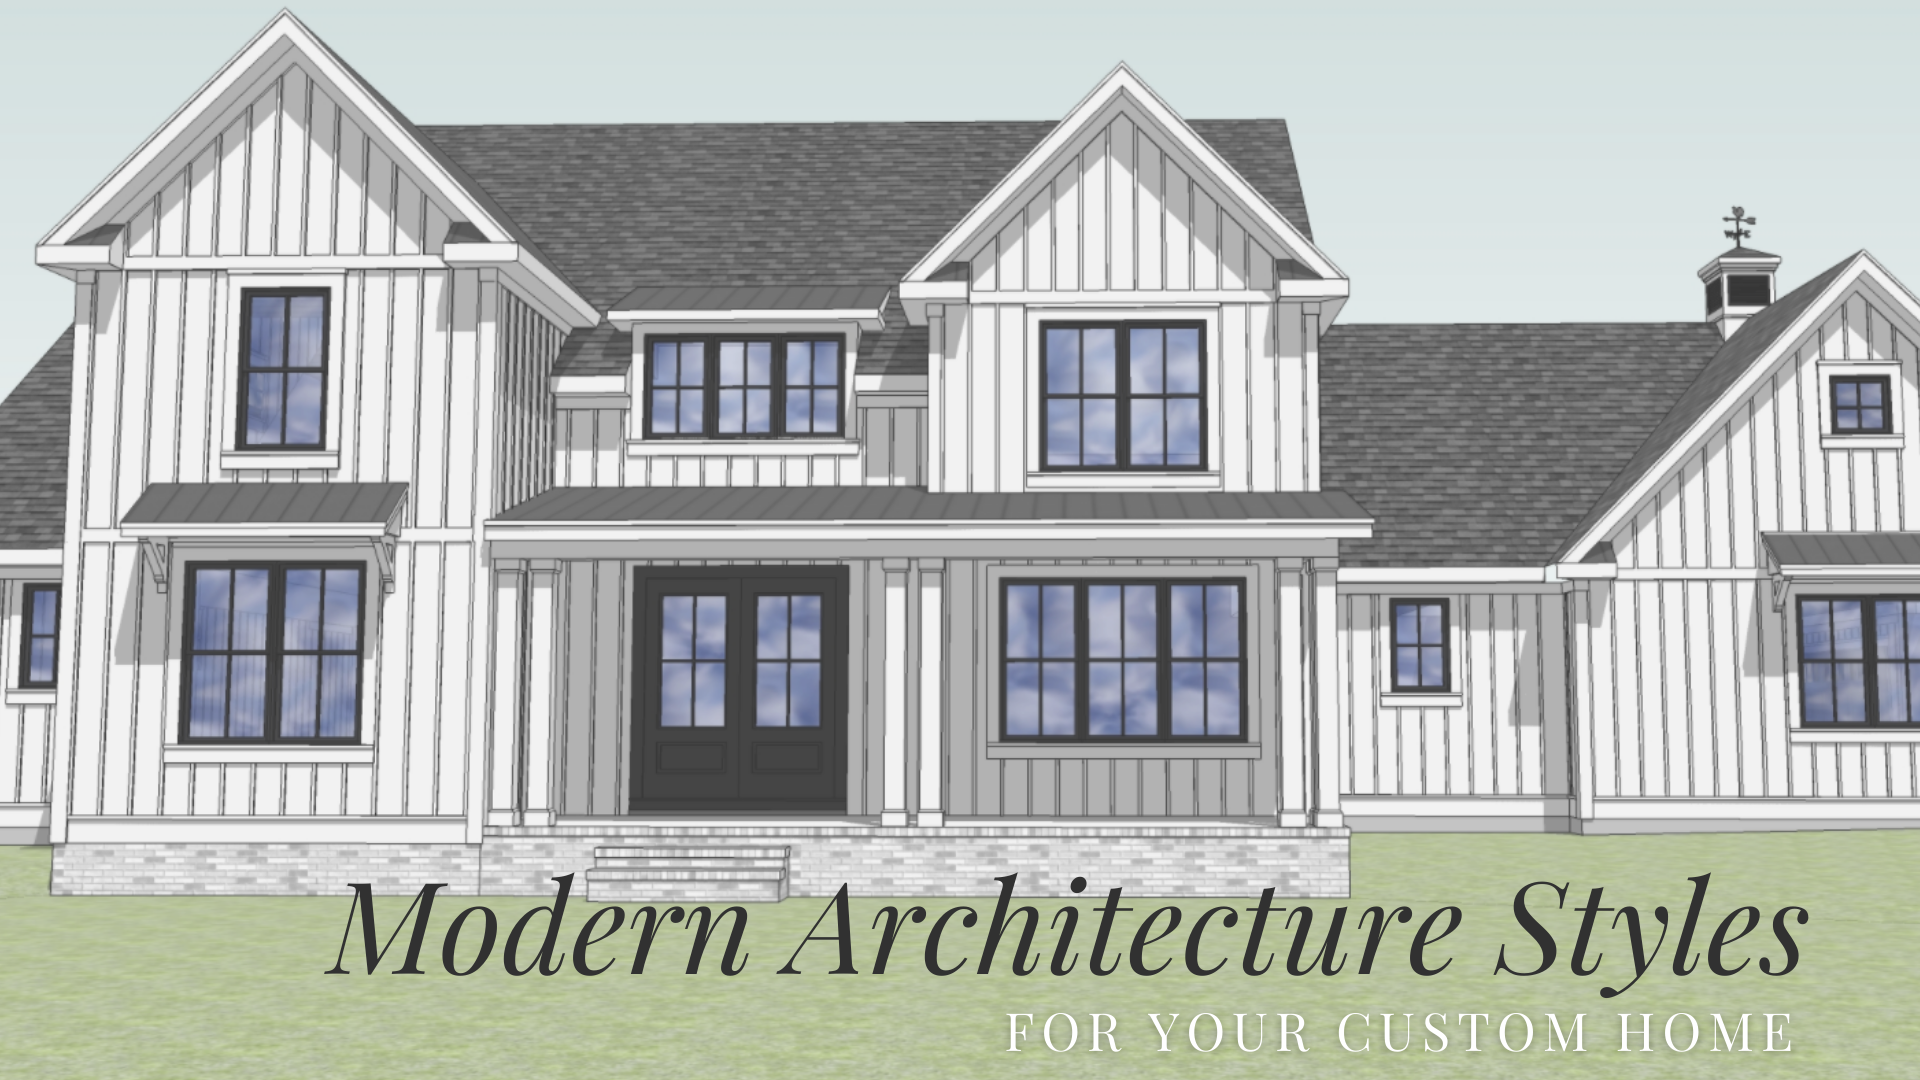 Modern Architecture Styles for Custom Homes